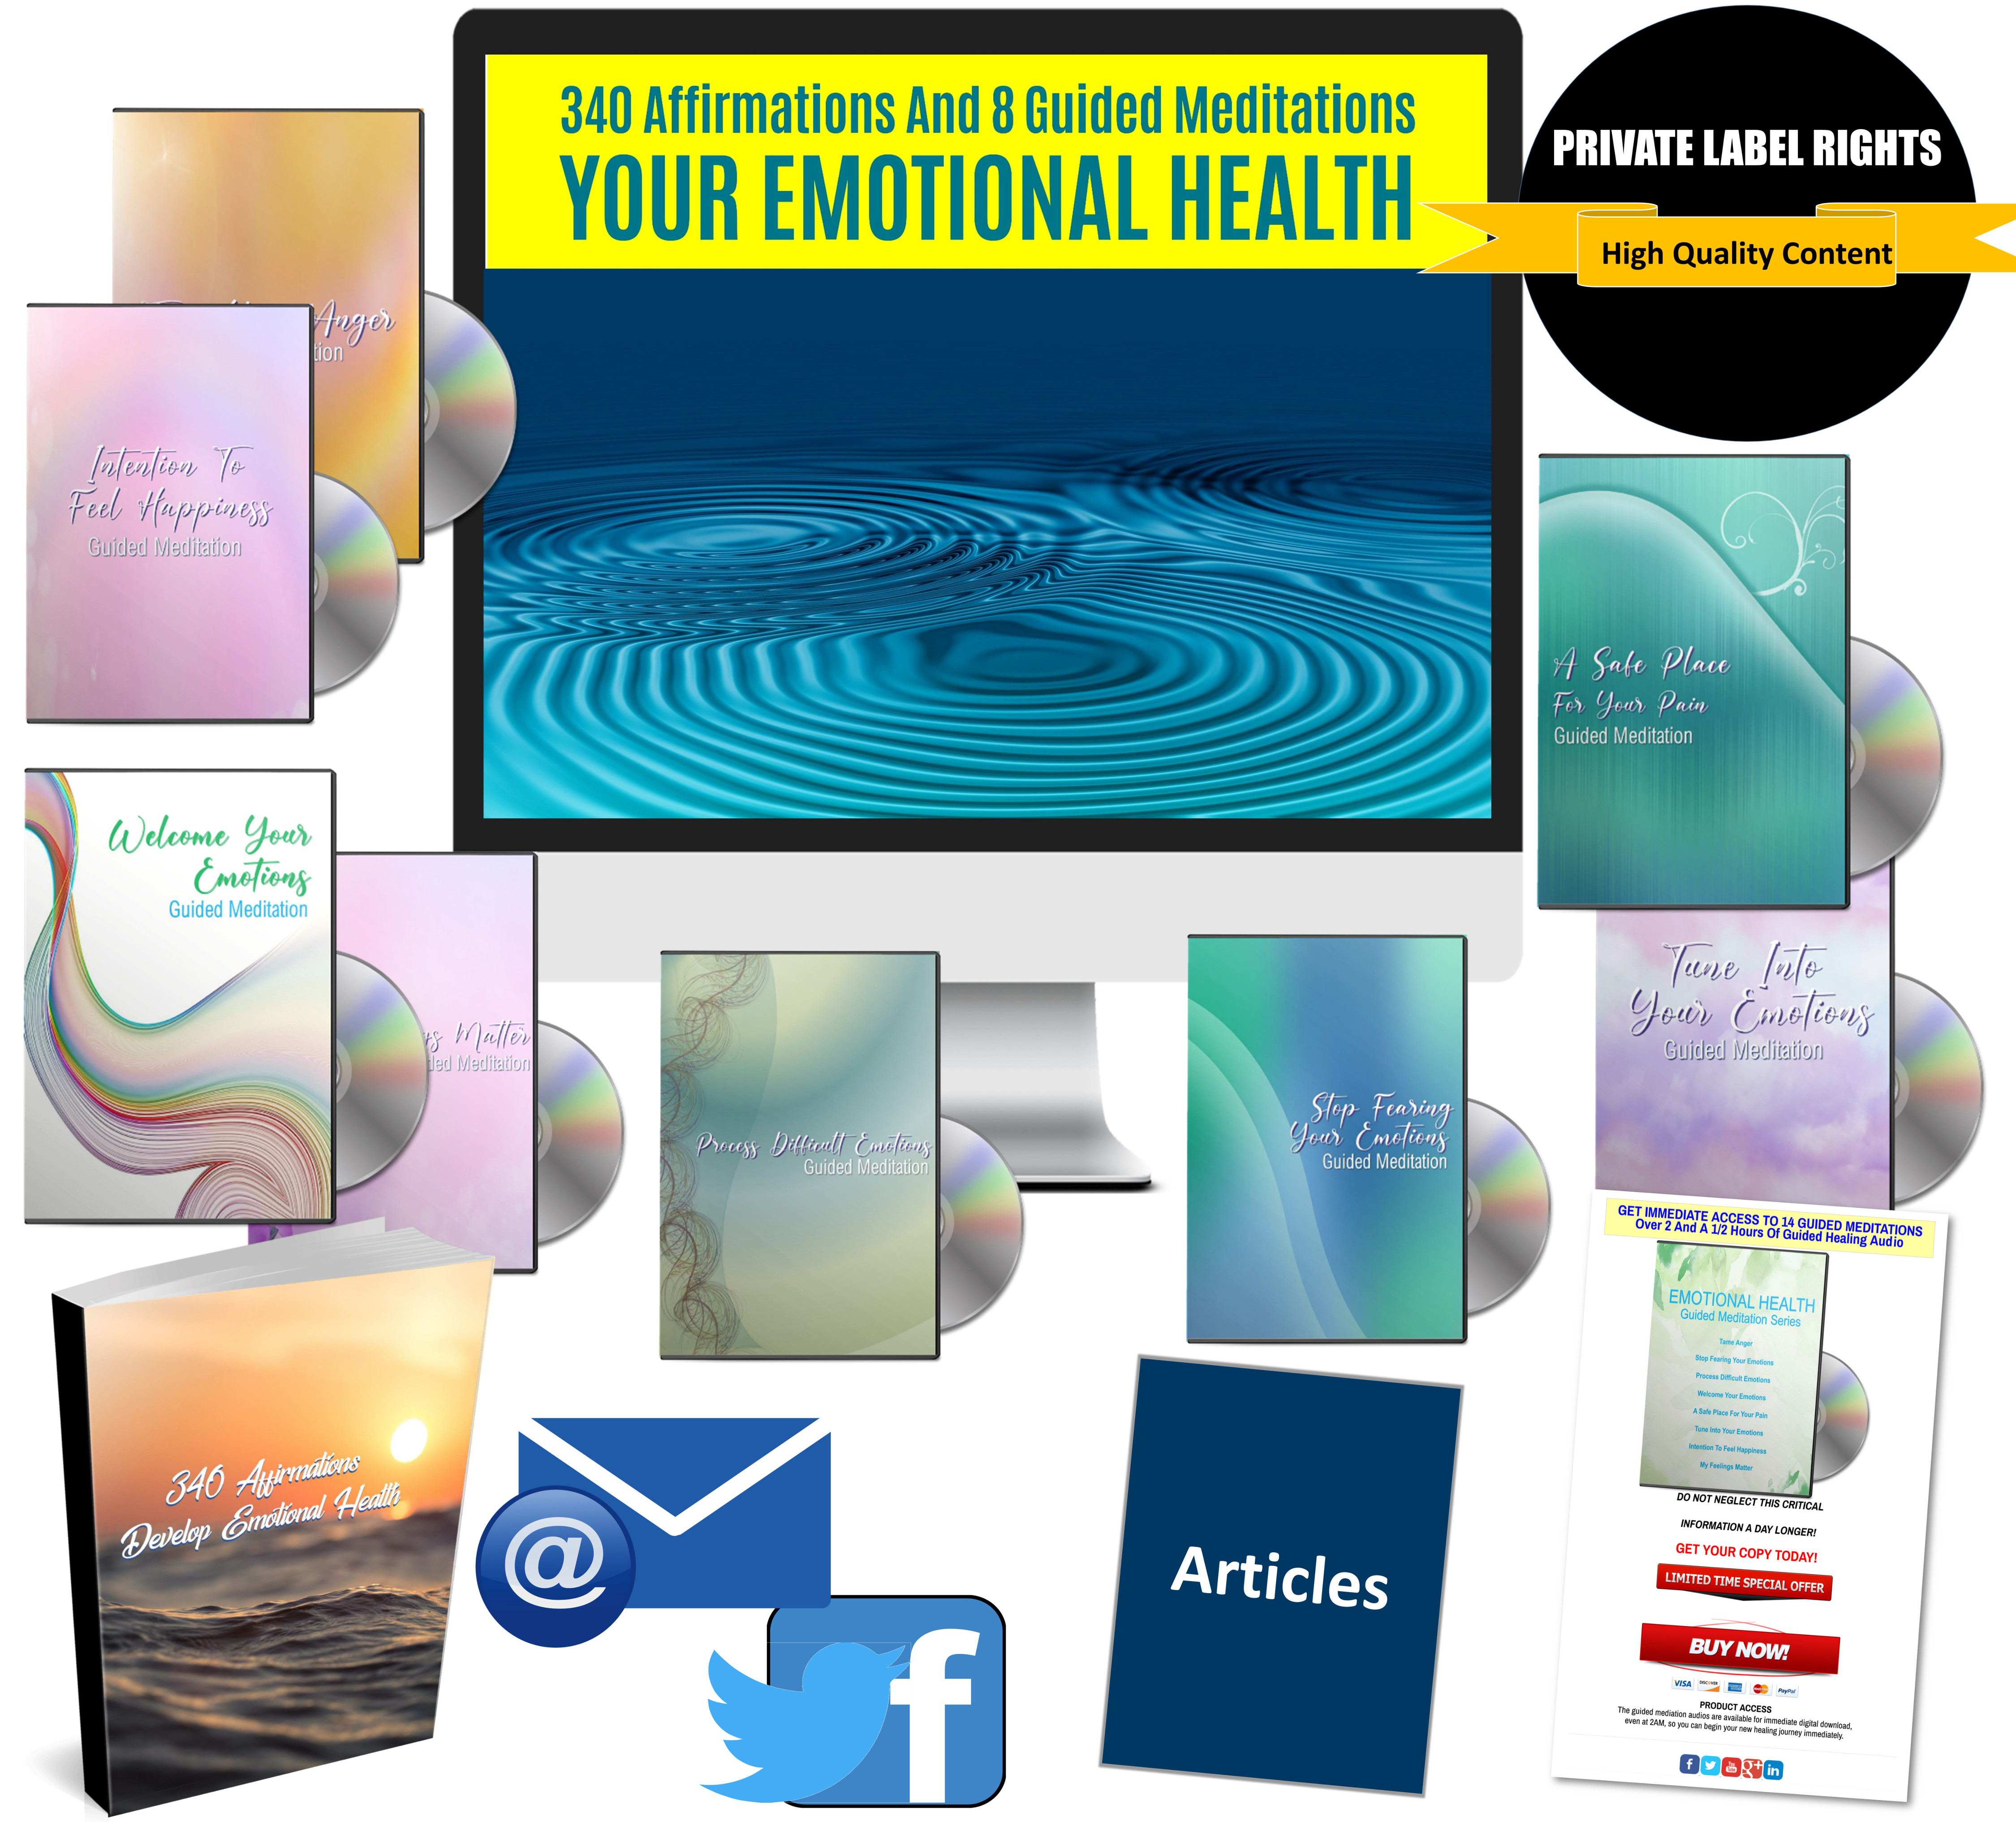 340 Affirmations And 8 Guided Meditations: Your Emotional Health Giant Content Pack with PLR Rights